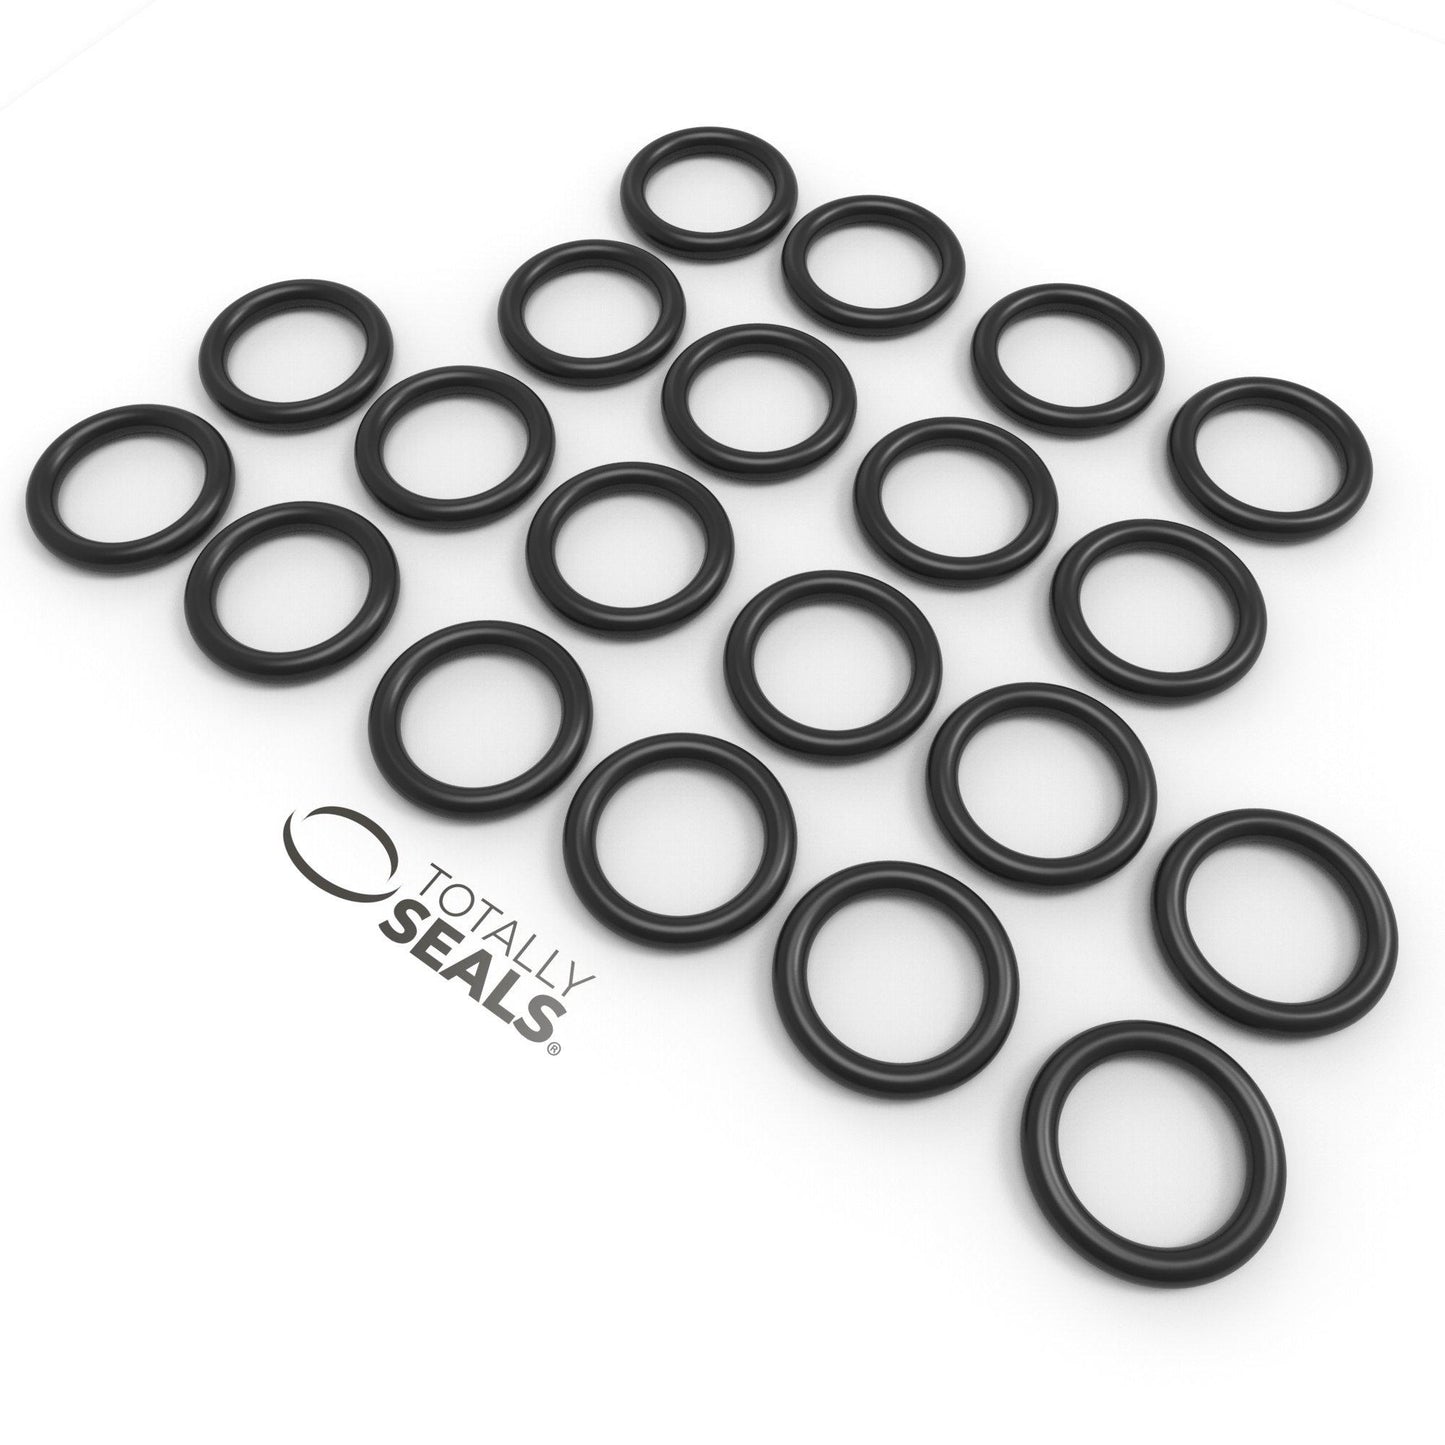 35mm x 1mm (37mm OD) Nitrile O-Rings - Totally Seals®